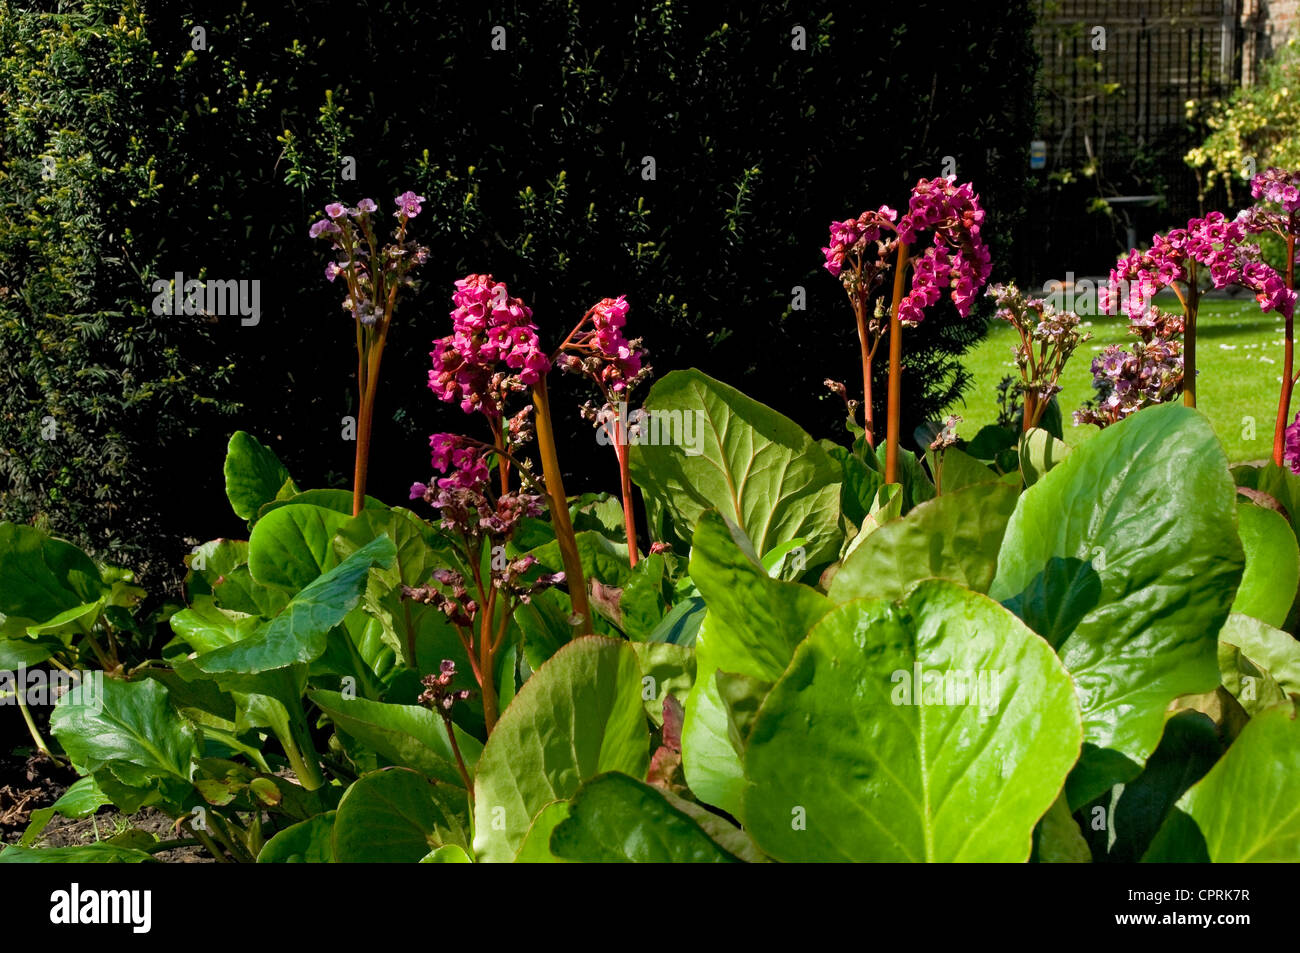 Close up of pink bergenia flowers flowering flower in spring garden England UK United Kingdom GB Great Britain Stock Photo